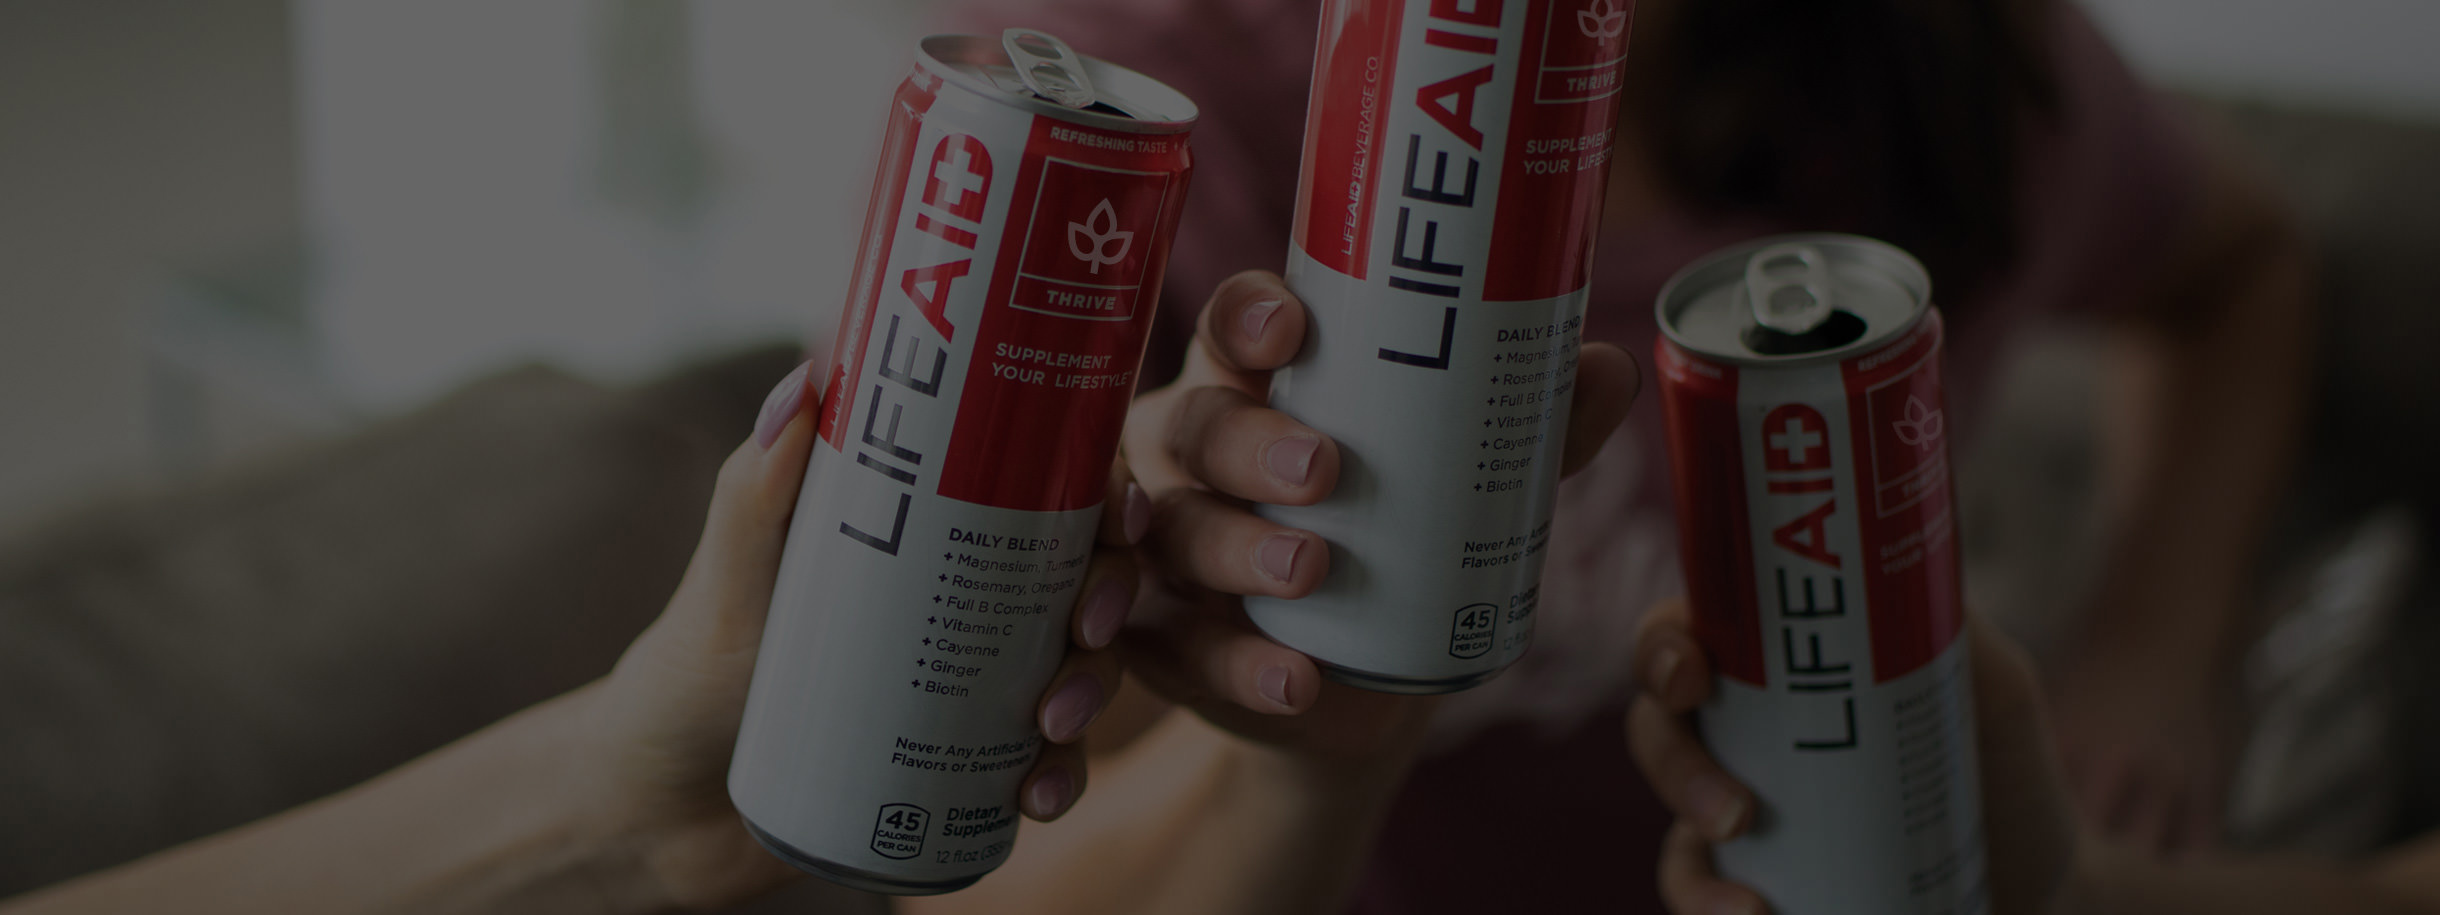 background image of hands holding LIFEAID cans